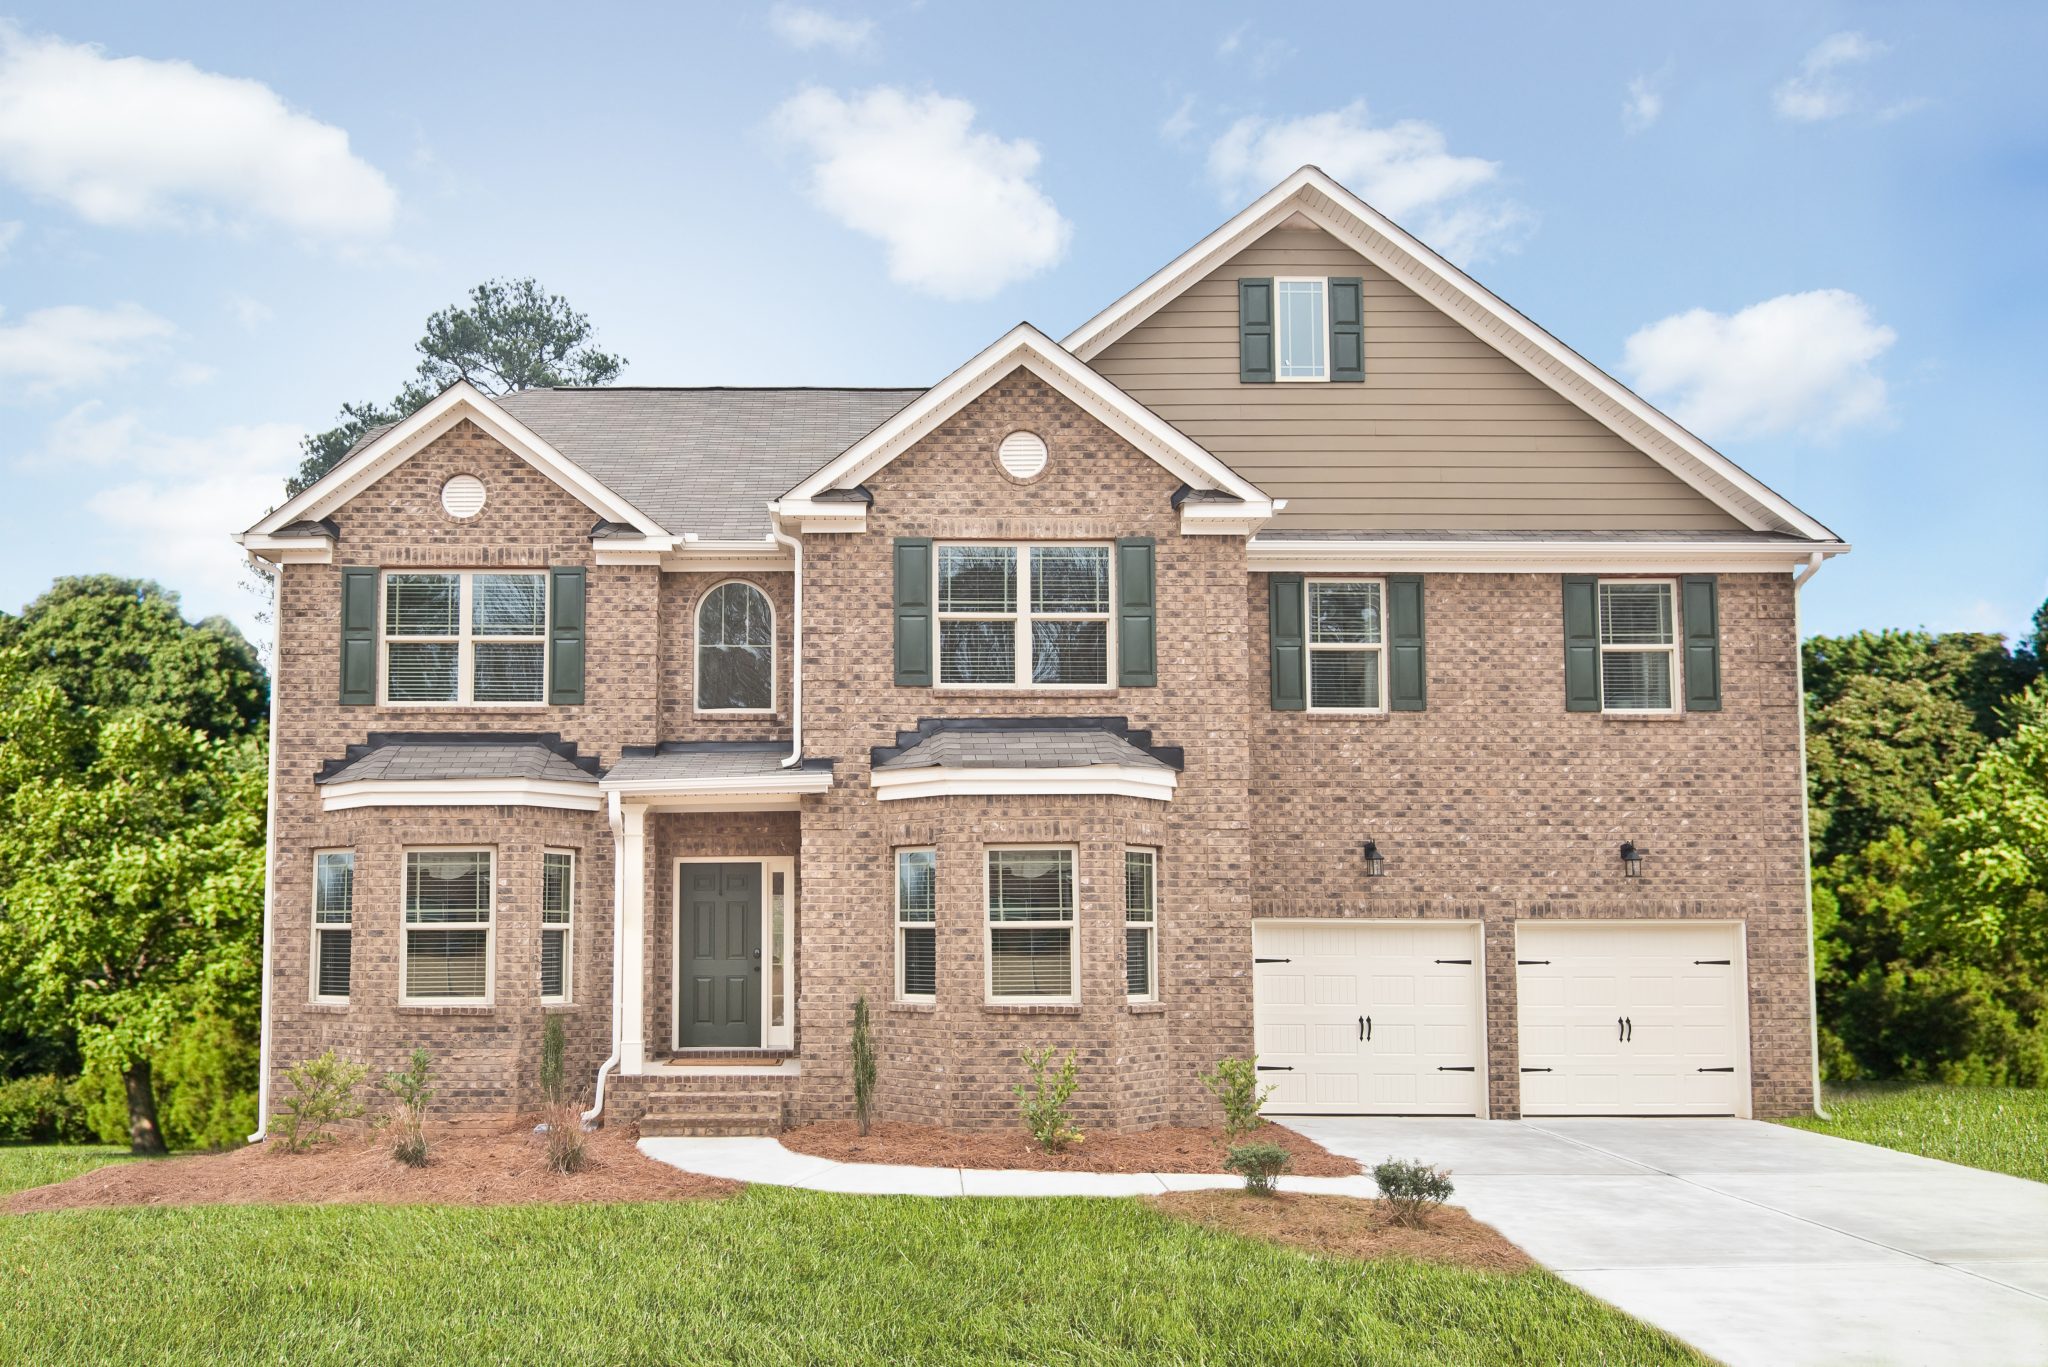 Updated Executive Series Homes - Kerley Family Homes